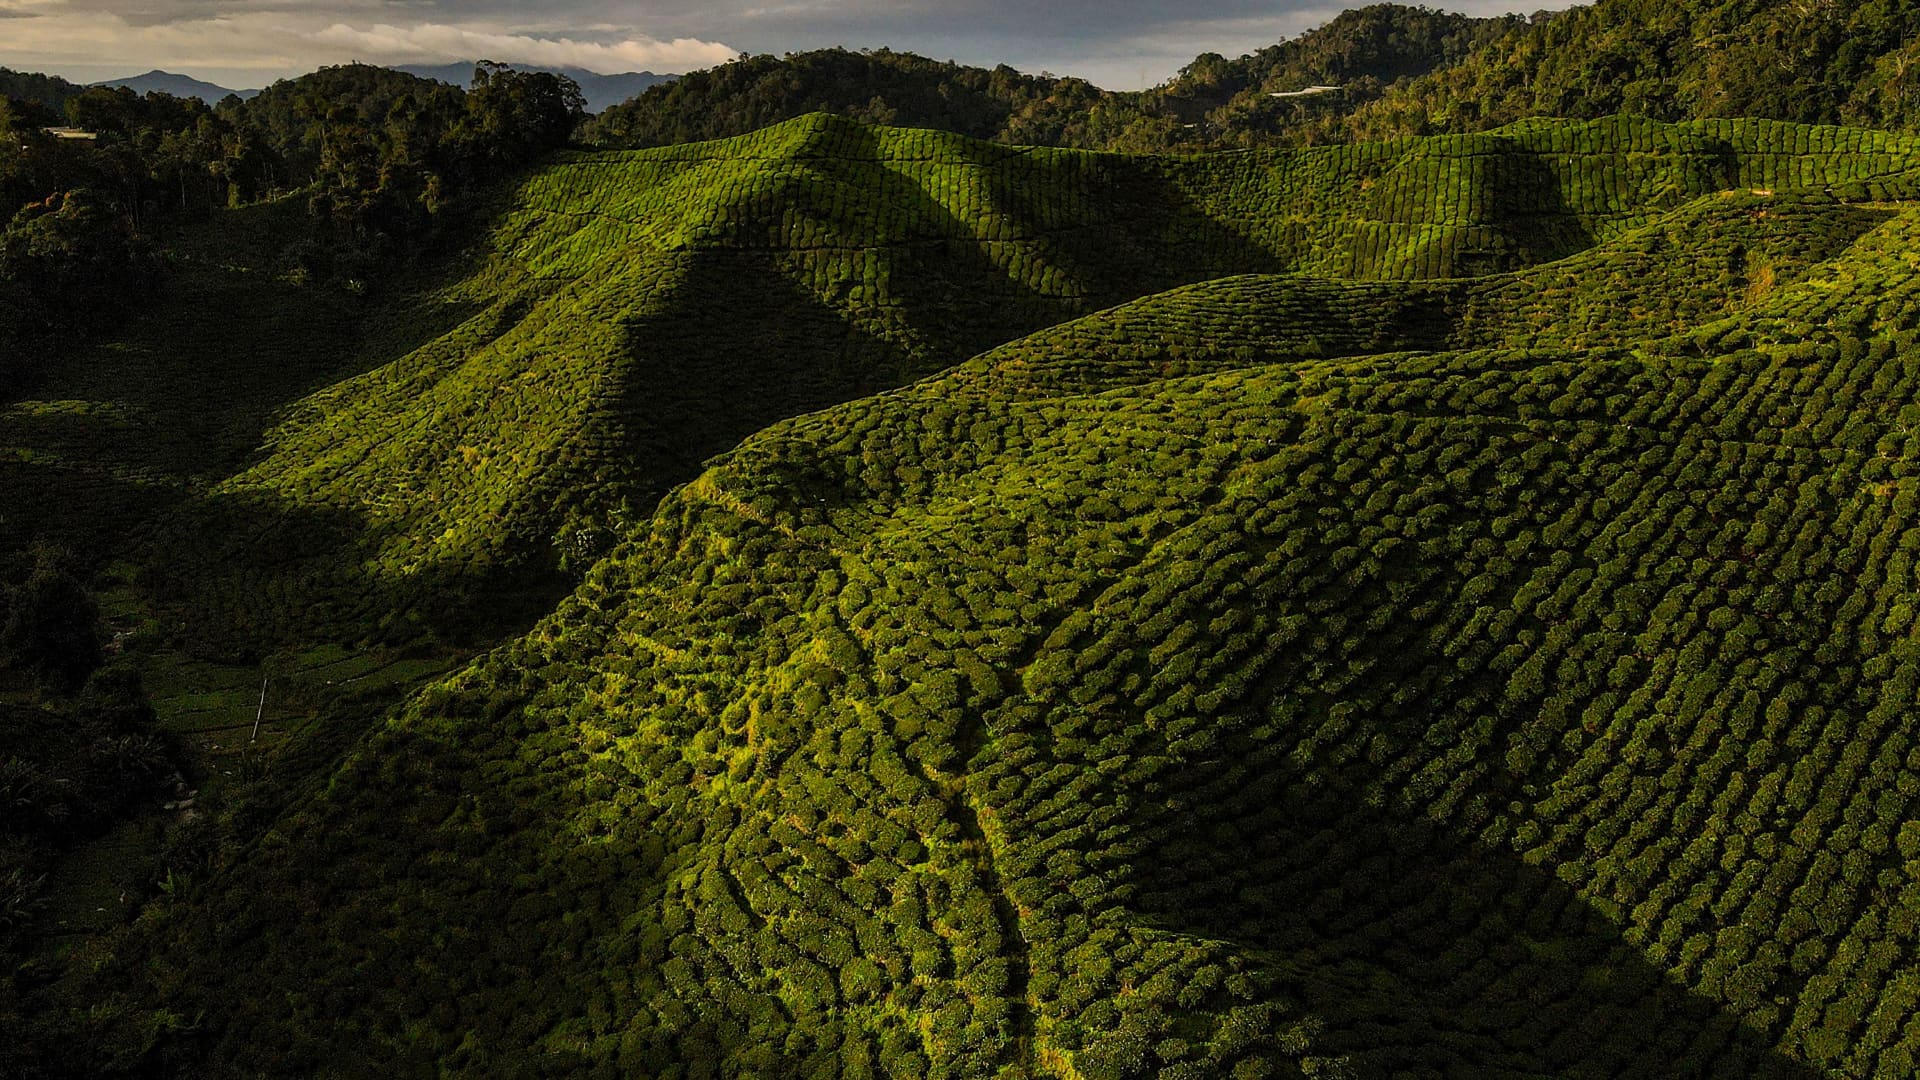 Dotted with tea plantations and hiking trails, Cameron Highlands is lush and cooler than other parts of Malaysia.